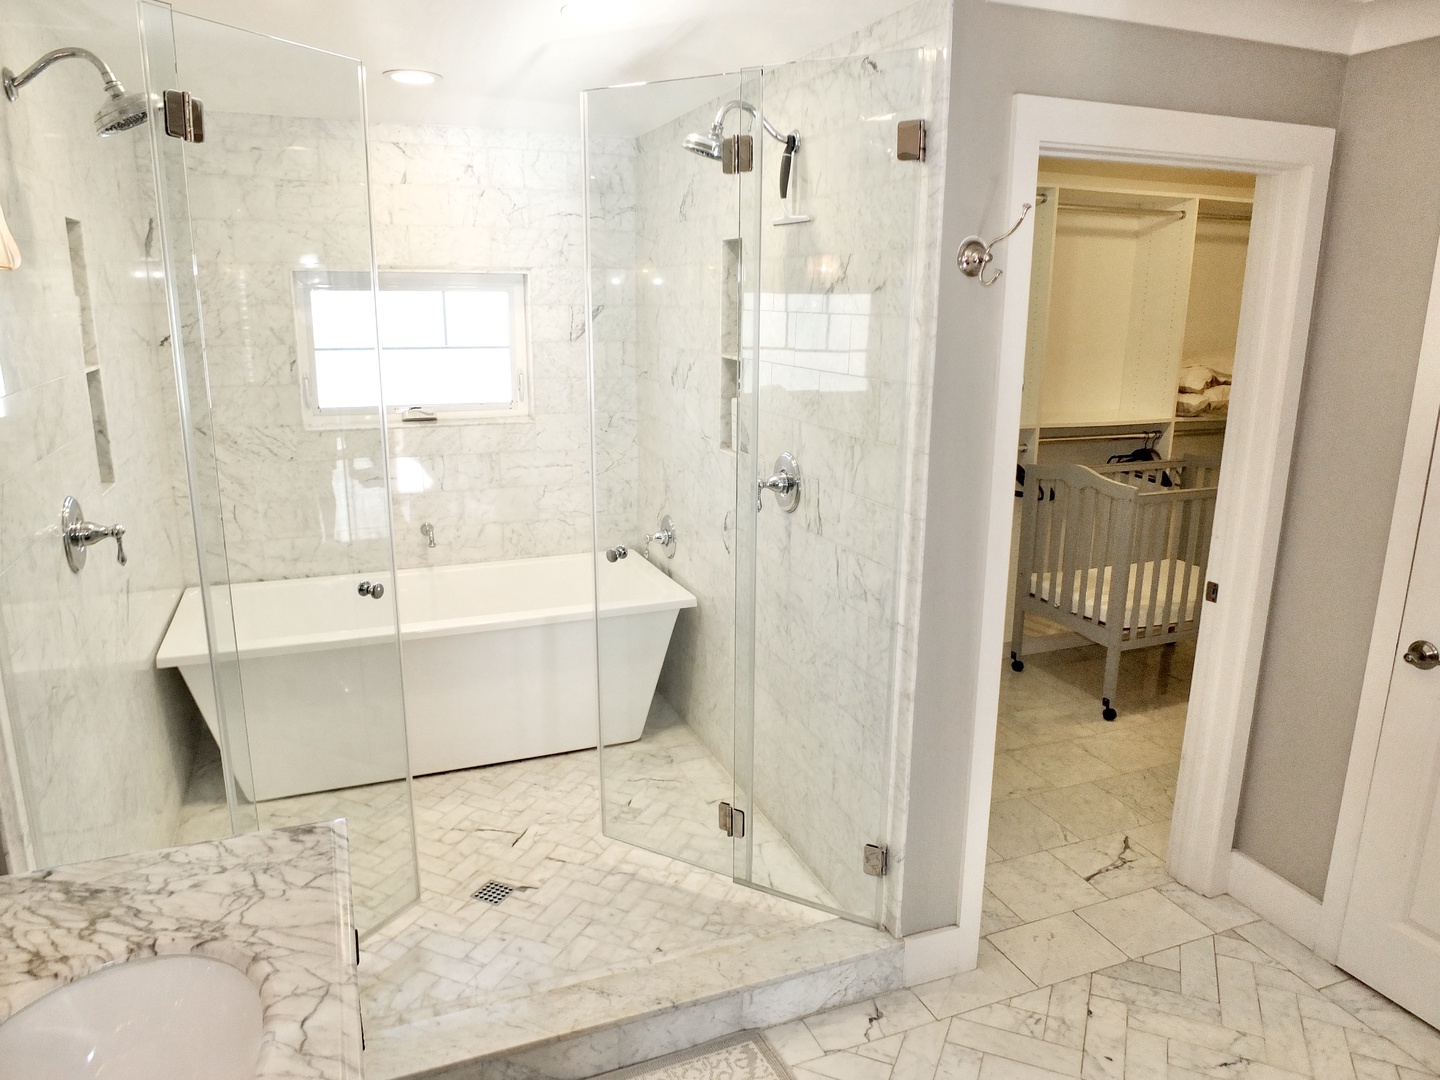 The king ensuite boasts a double vanity, spa-like shower, & soaking tub